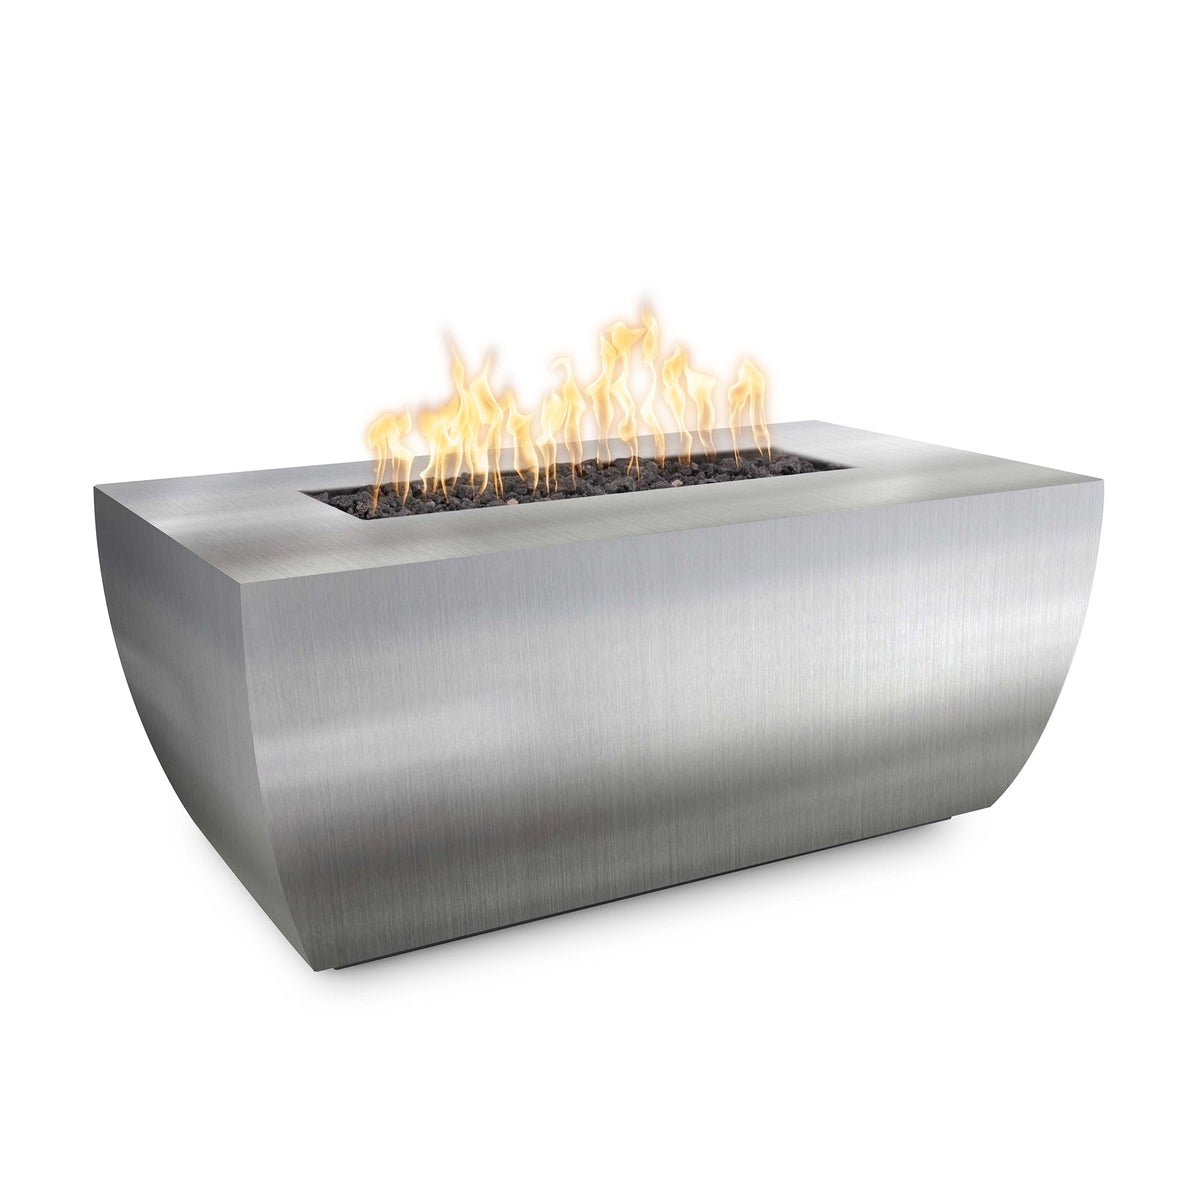 The Outdoor Plus Fire Features The Outdoor Plus 24&quot; Tall 48&quot;, 60&quot;, 72&quot;, 84&quot; Rectangular Avalon Stainless Steel Fire Pit / OPT-AVLSSxx24, OPT-AVLSSxx24FSML, OPT-AVLSSxx24FSEN, OPT-AVLSSxx24E12V, OPT-AVLSSxx24EKIT